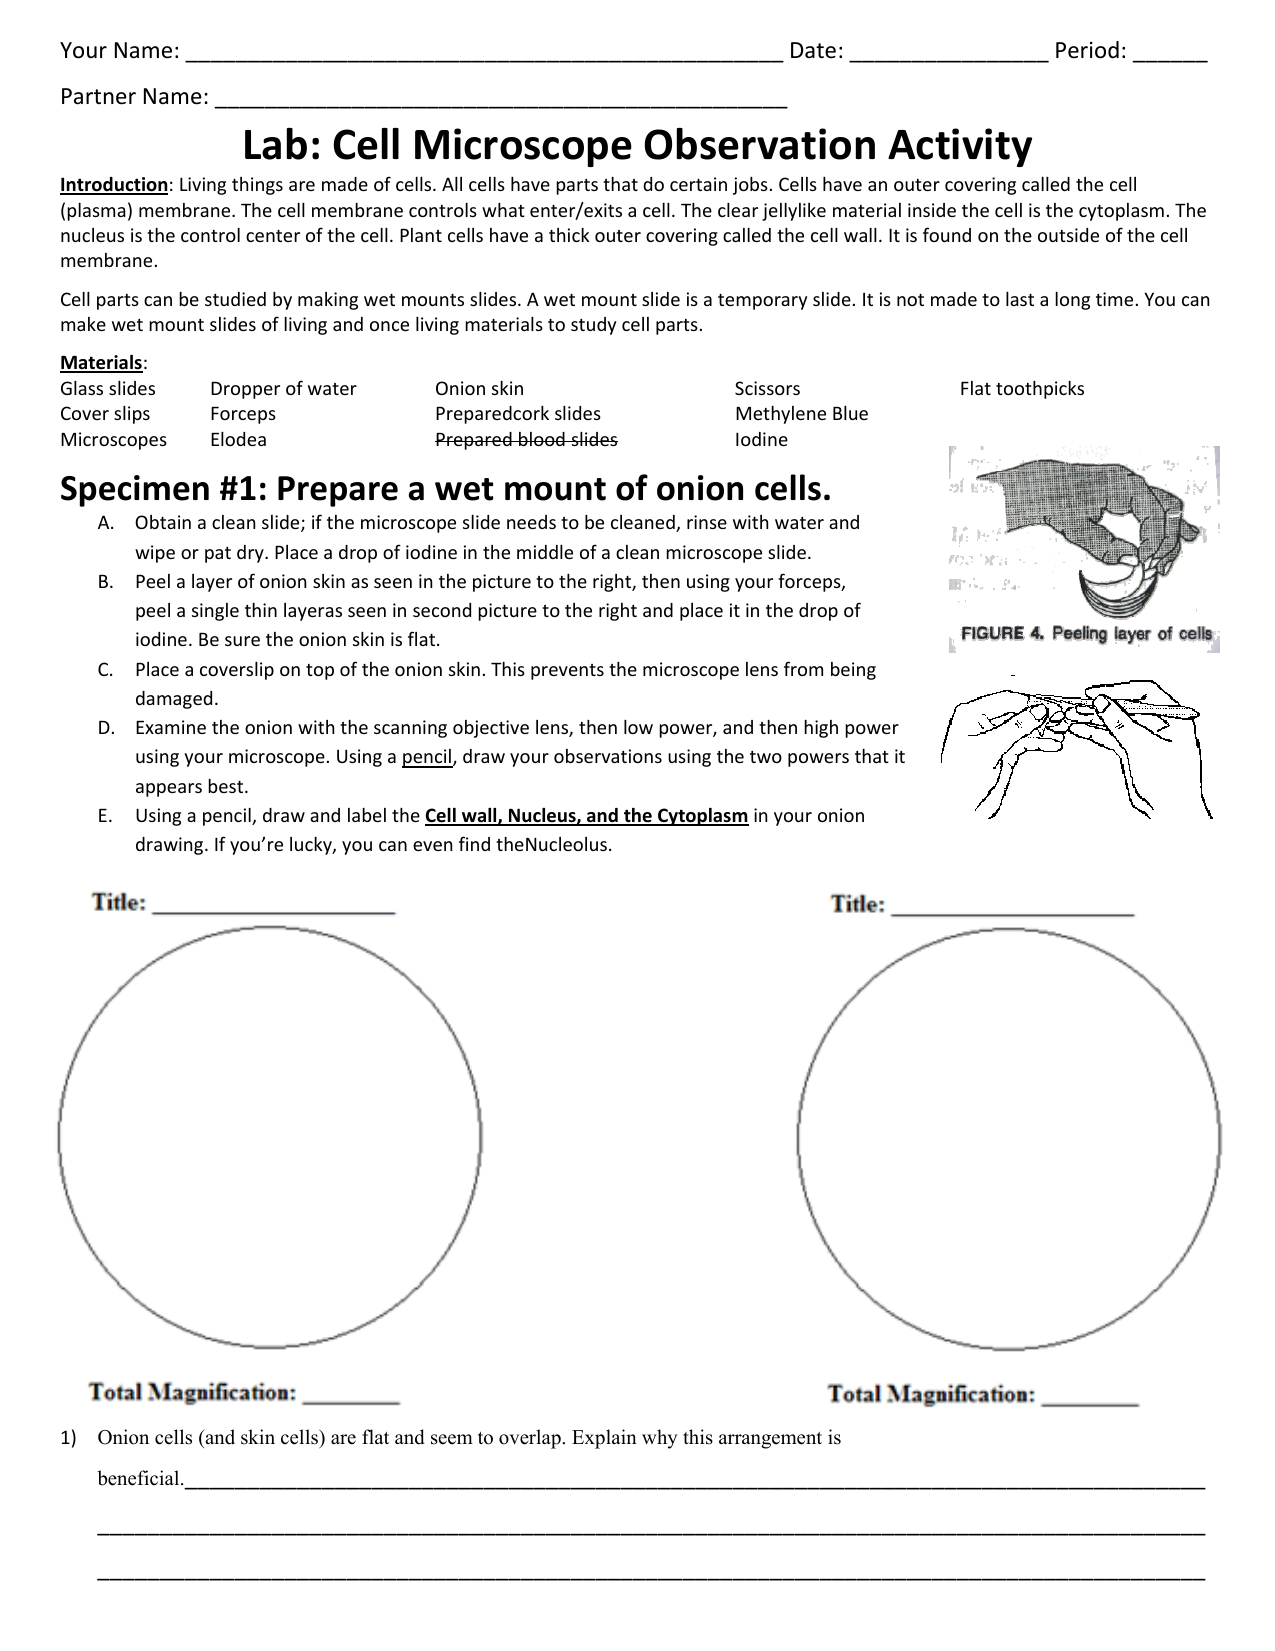 Lab Cell Microscope Observation Activity With Regard To Microscope Slide Observation Worksheet